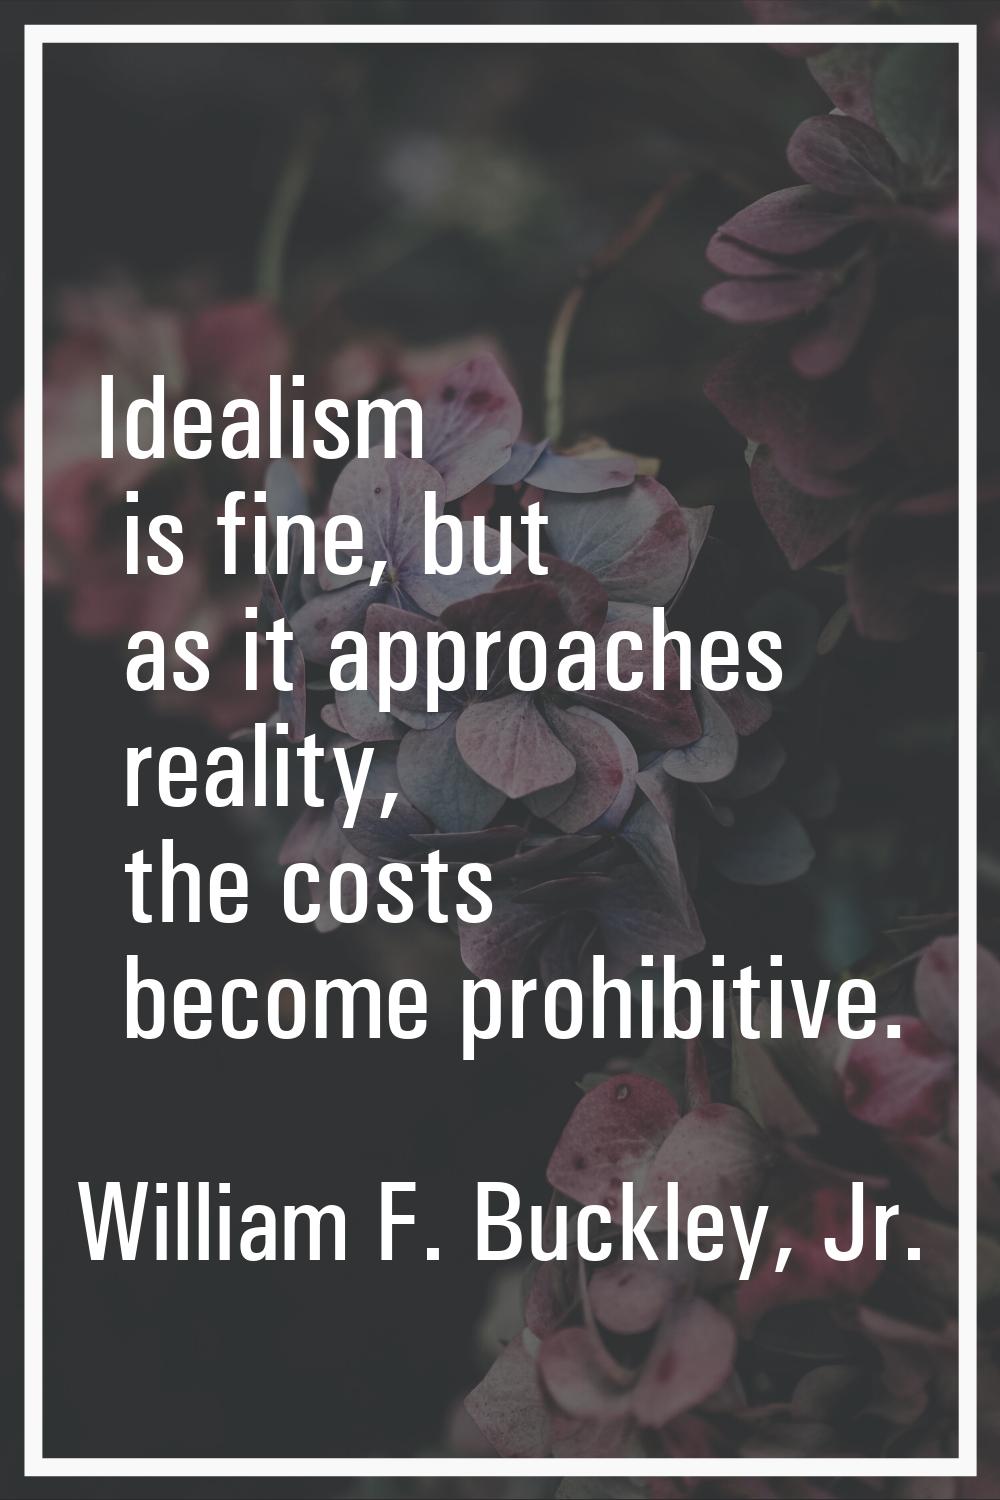 Idealism is fine, but as it approaches reality, the costs become prohibitive.